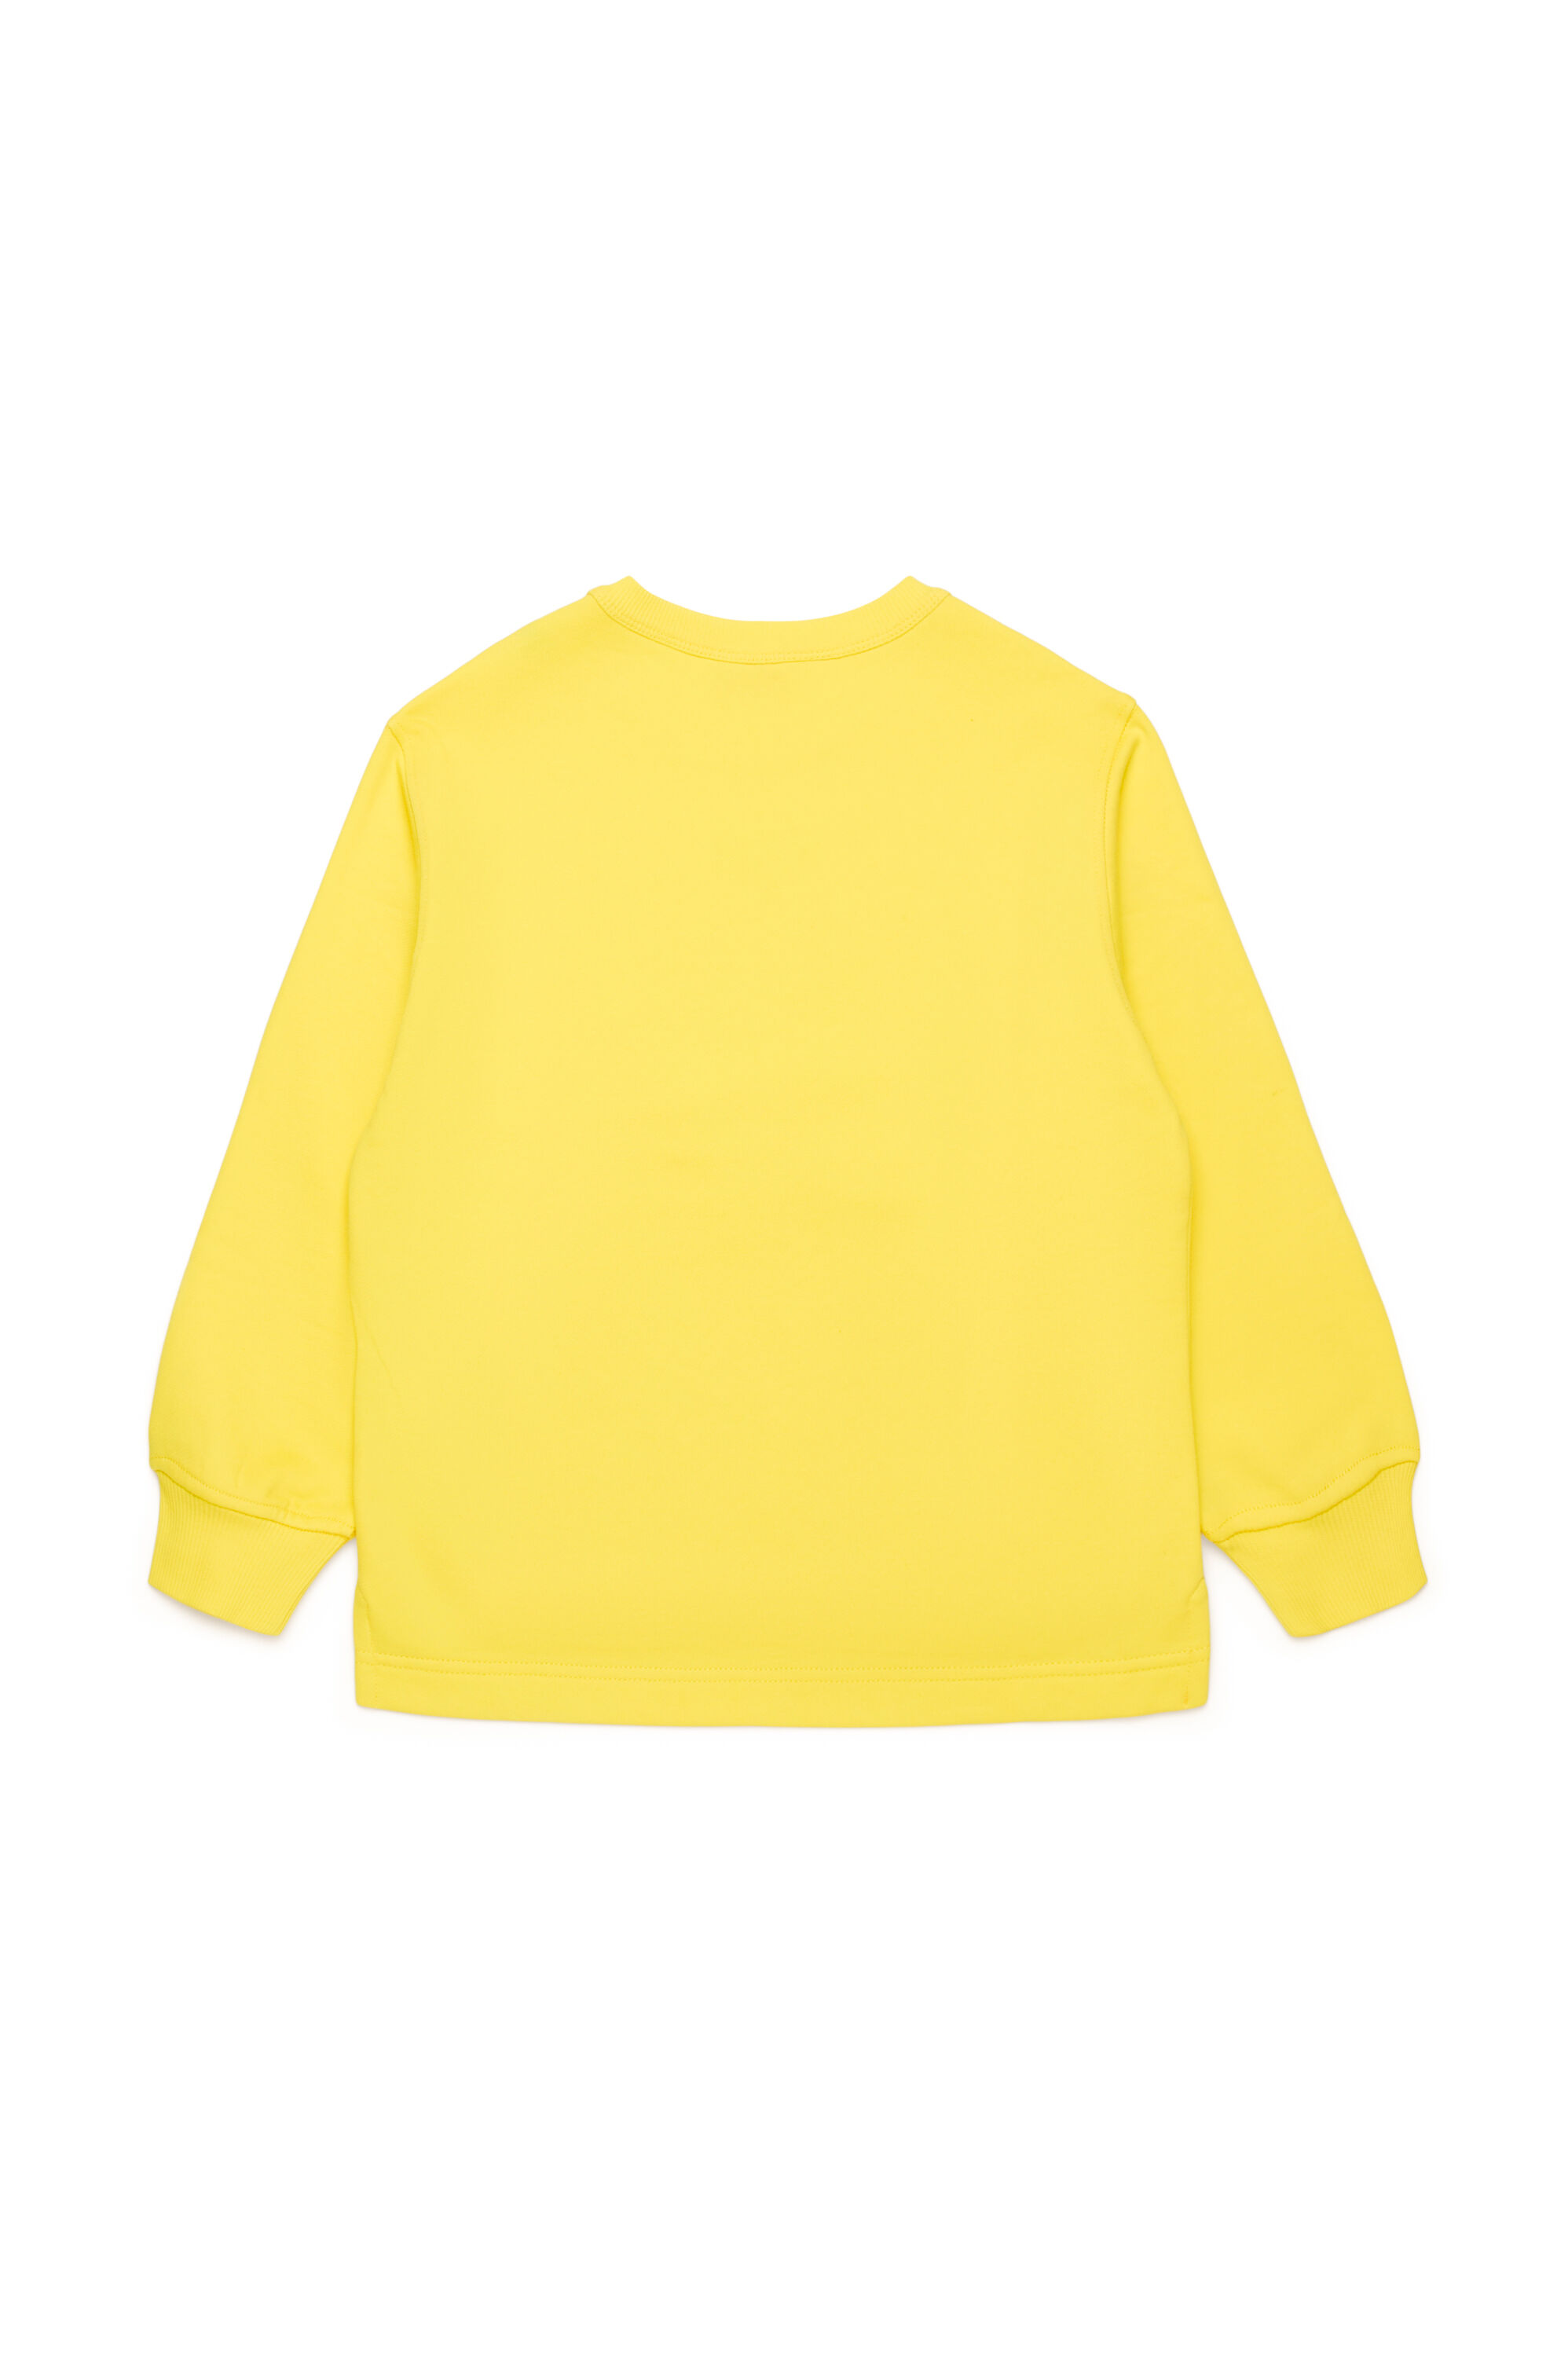 SMACSISOD OVER, Yellow